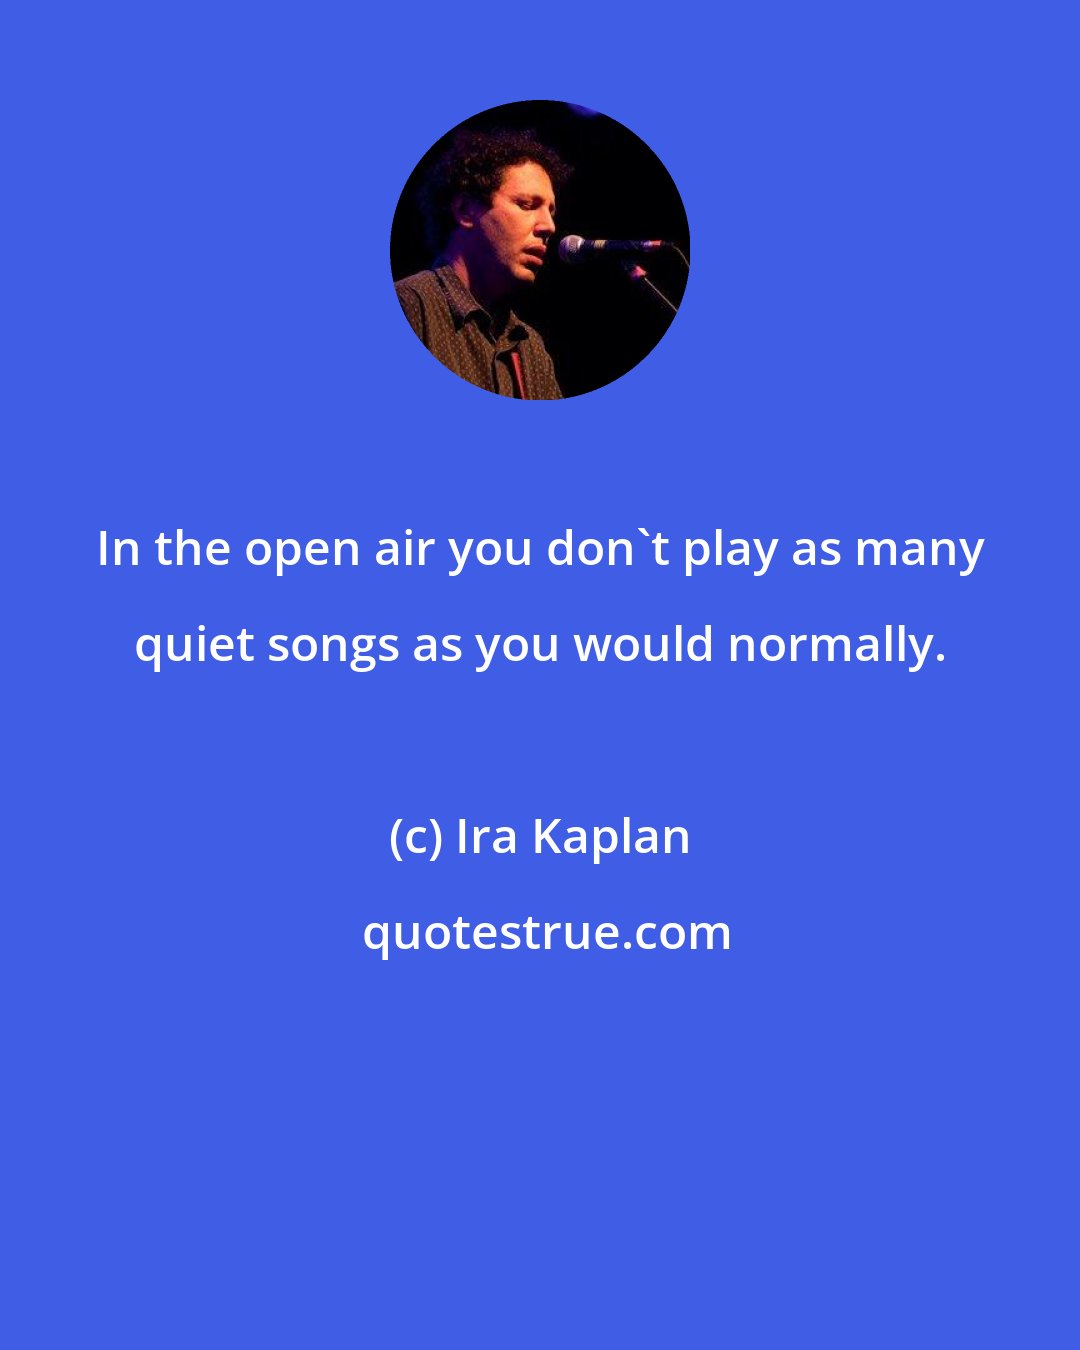 Ira Kaplan: In the open air you don't play as many quiet songs as you would normally.